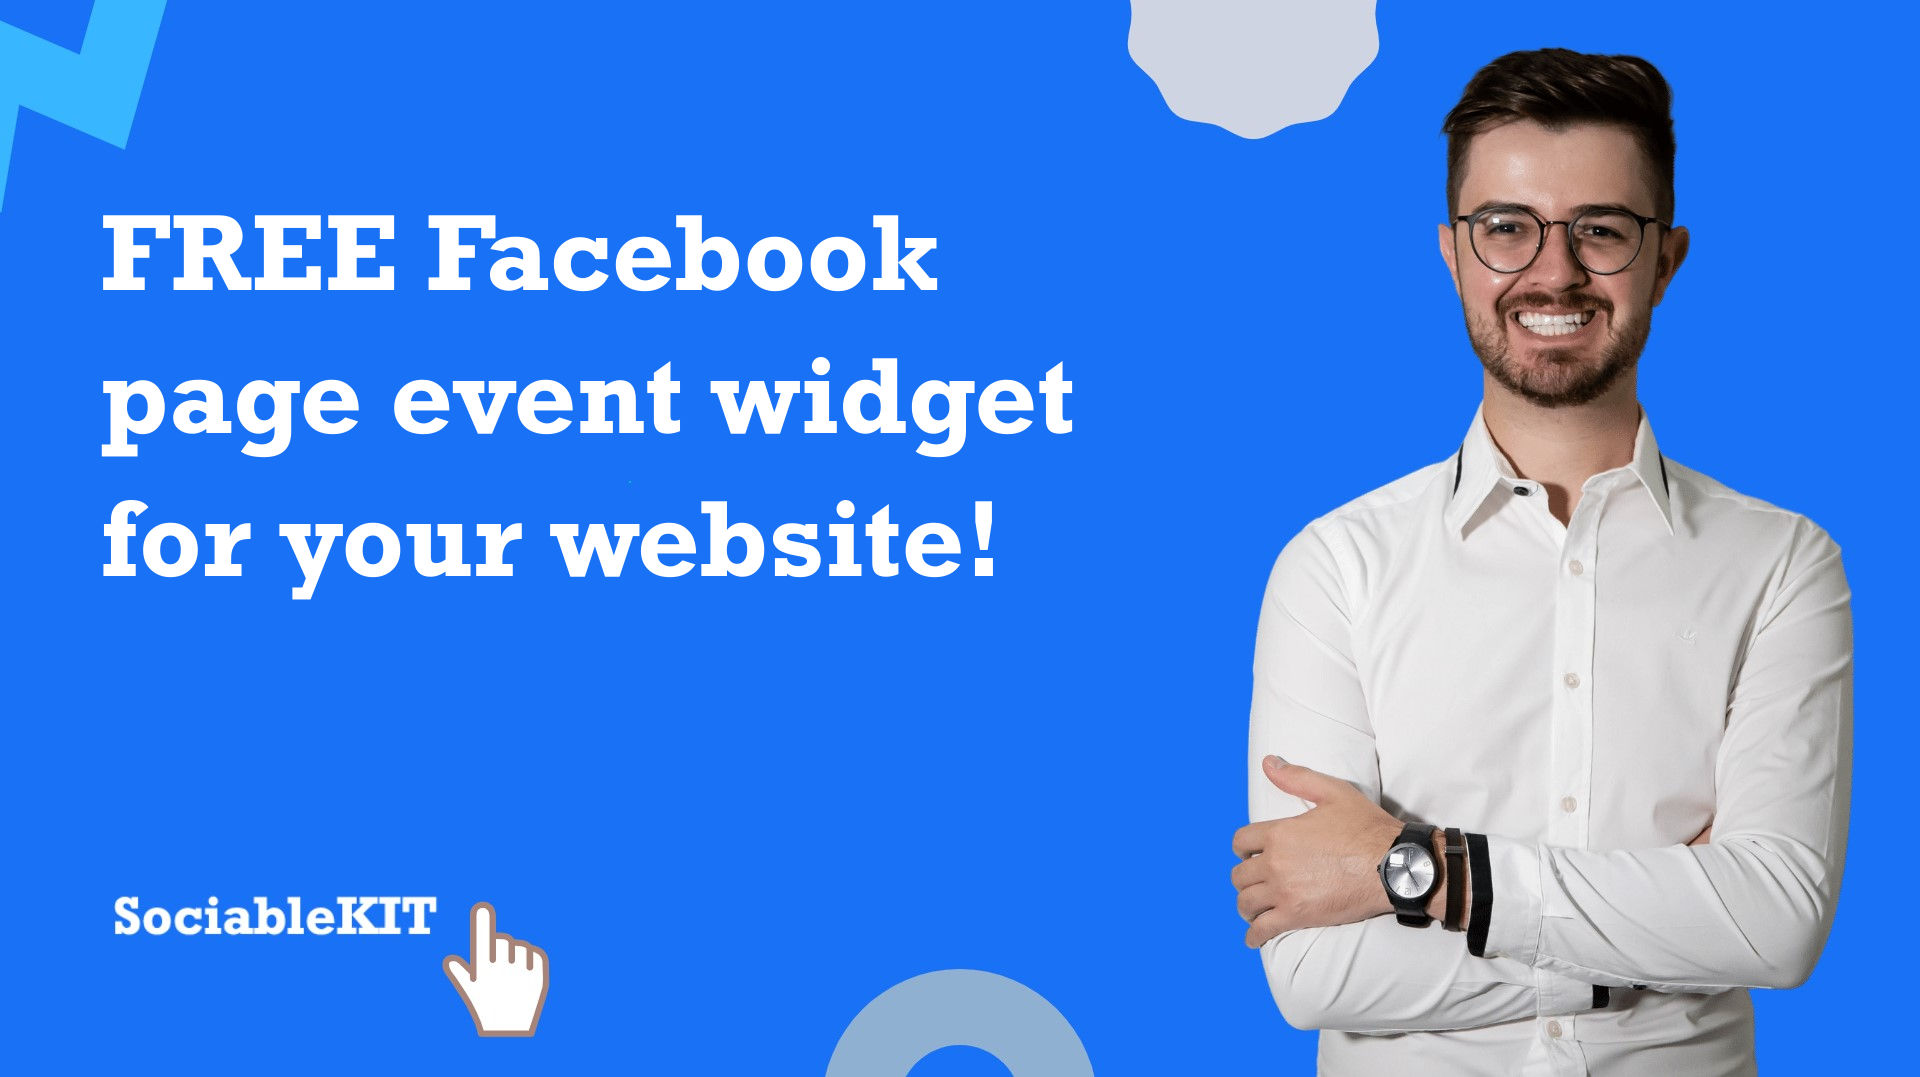 Free Facebook page event (one event) widget for your website